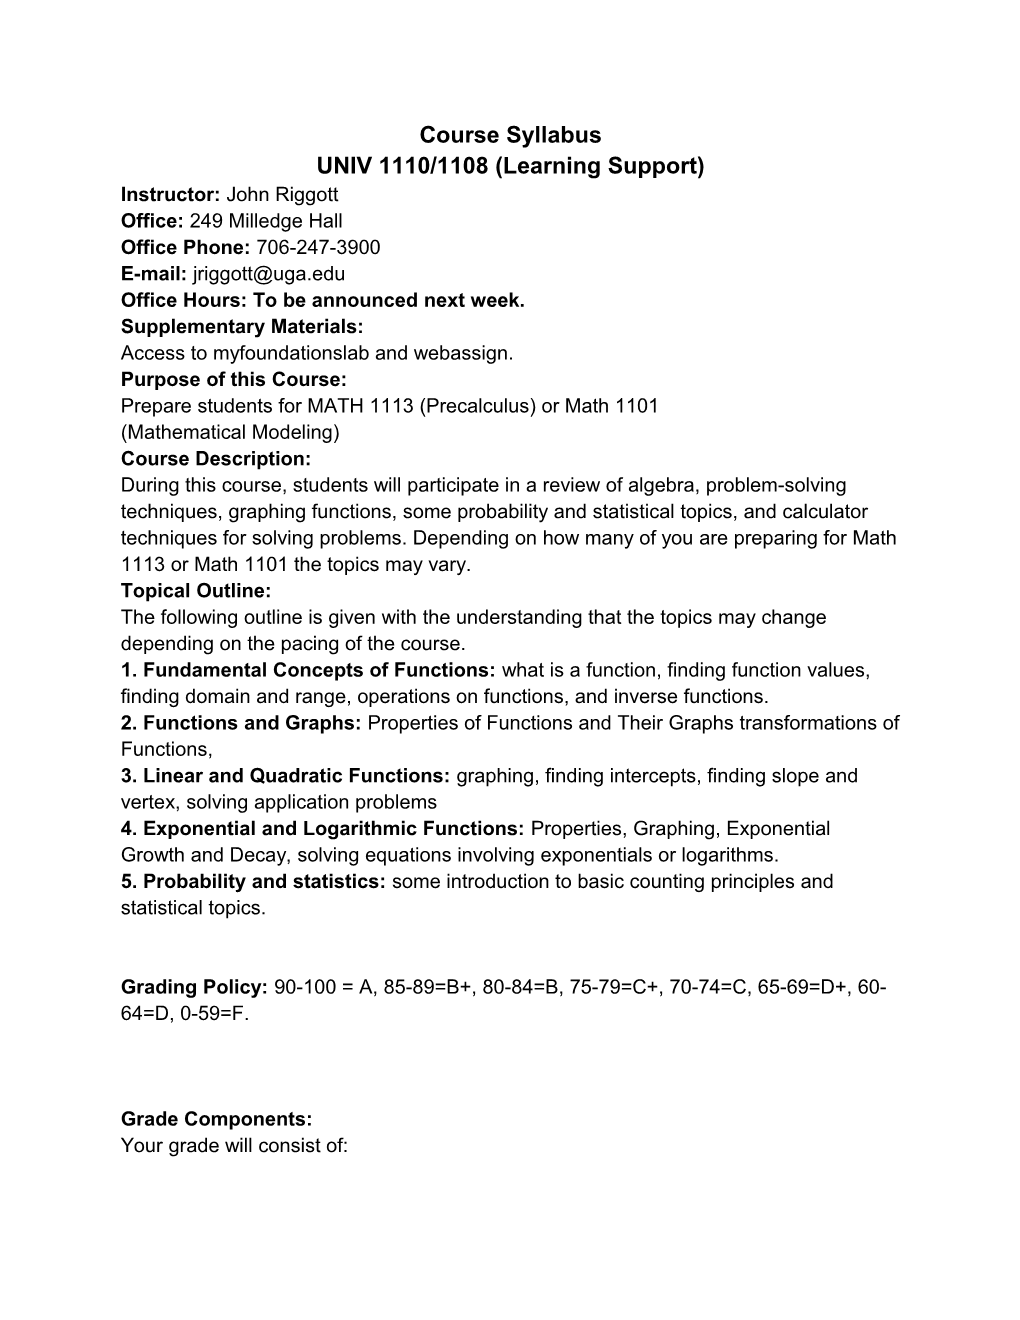 UNIV 1110/1108 (Learning Support)